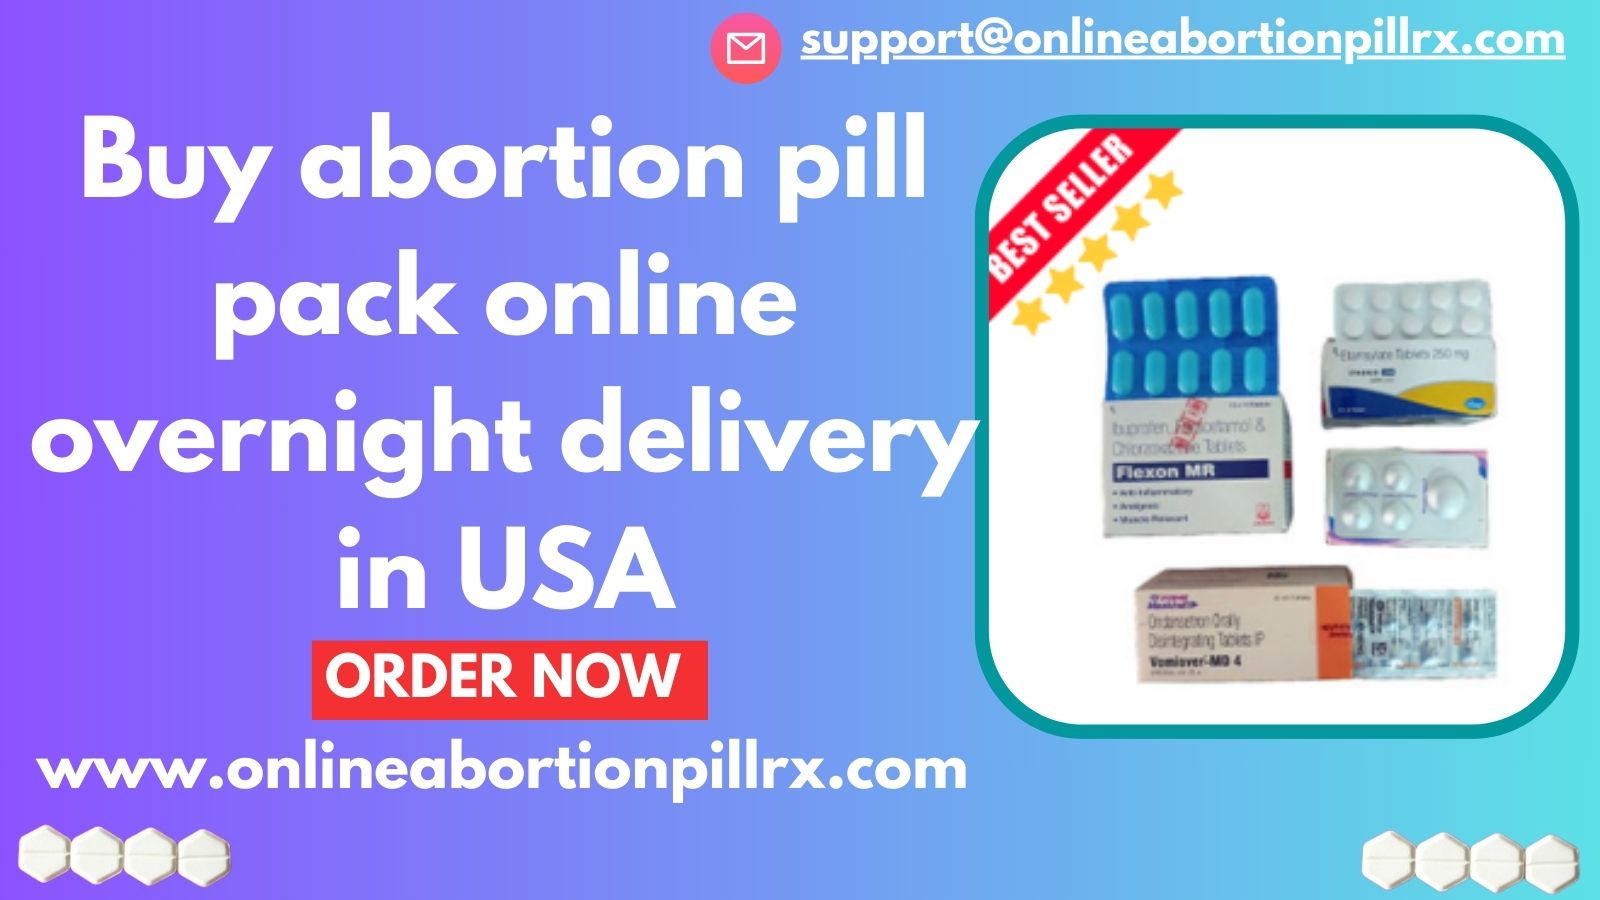 Buy abortion pill pack online overnight delivery in indiana - Indiana - Indianapolis ID1544116